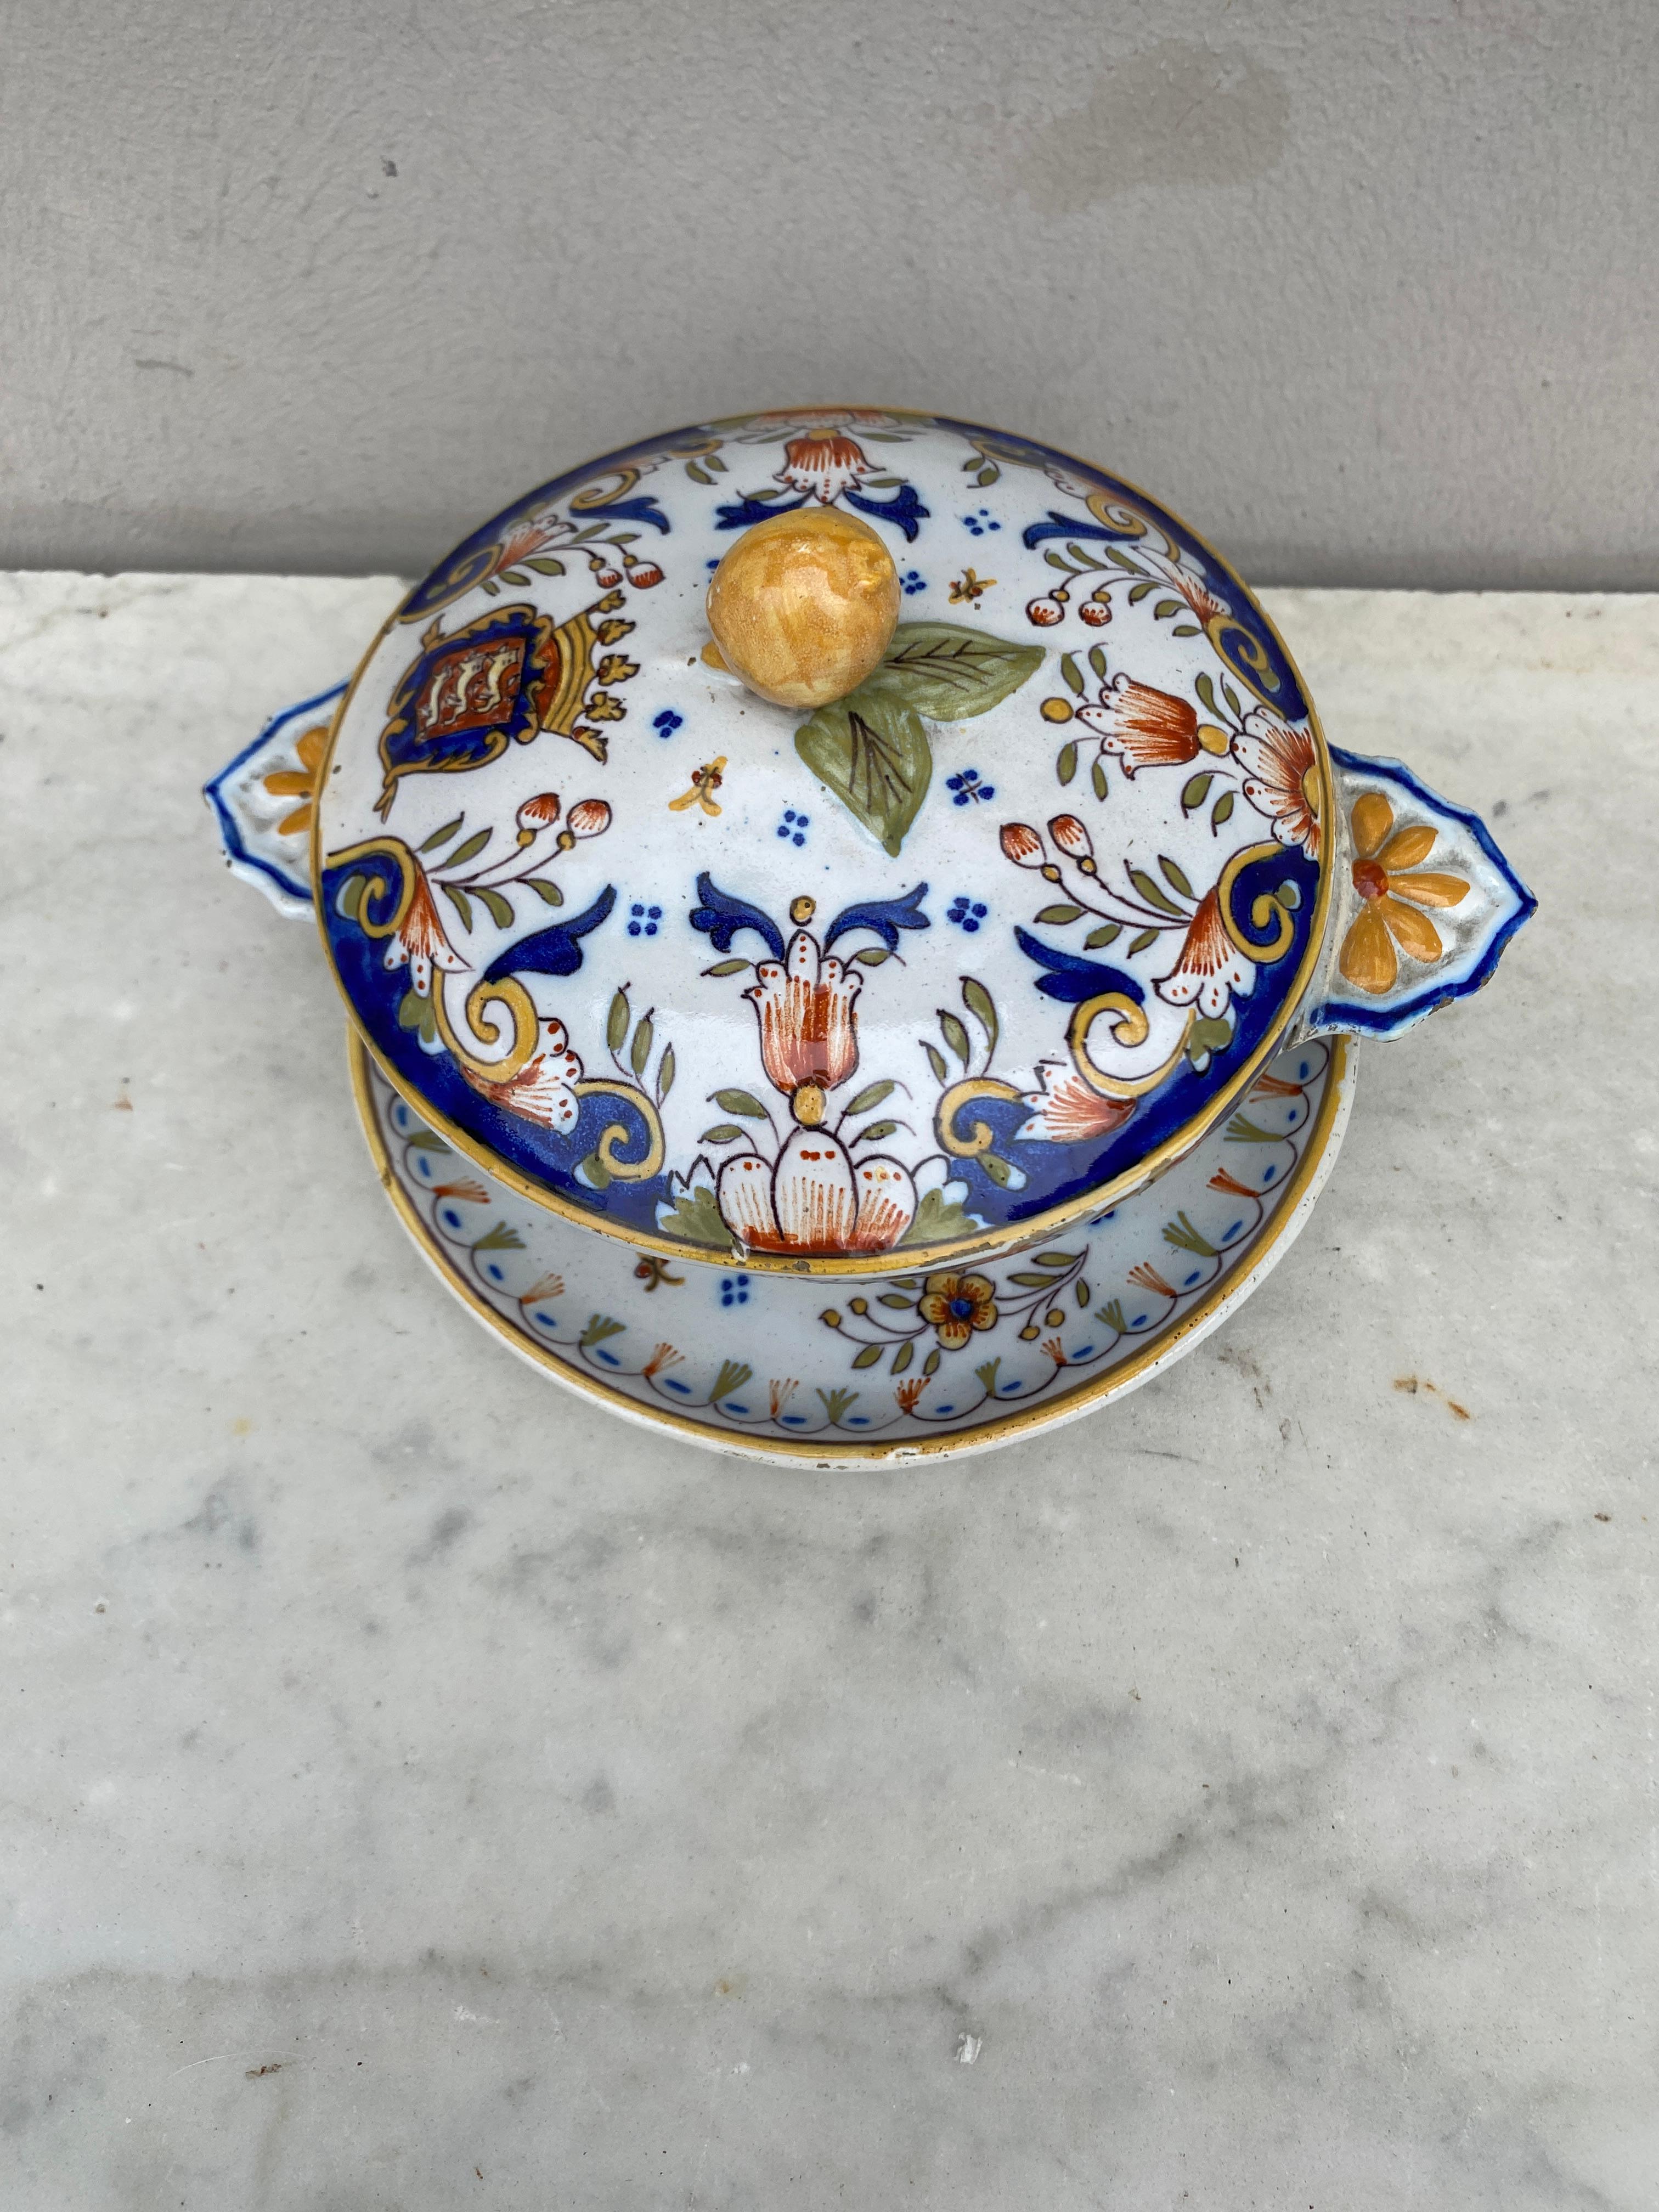 French Faience Tureen attributed to Desvres Circa 1900.
Inspired by Rouen manufacture.
Signed Arromanches.